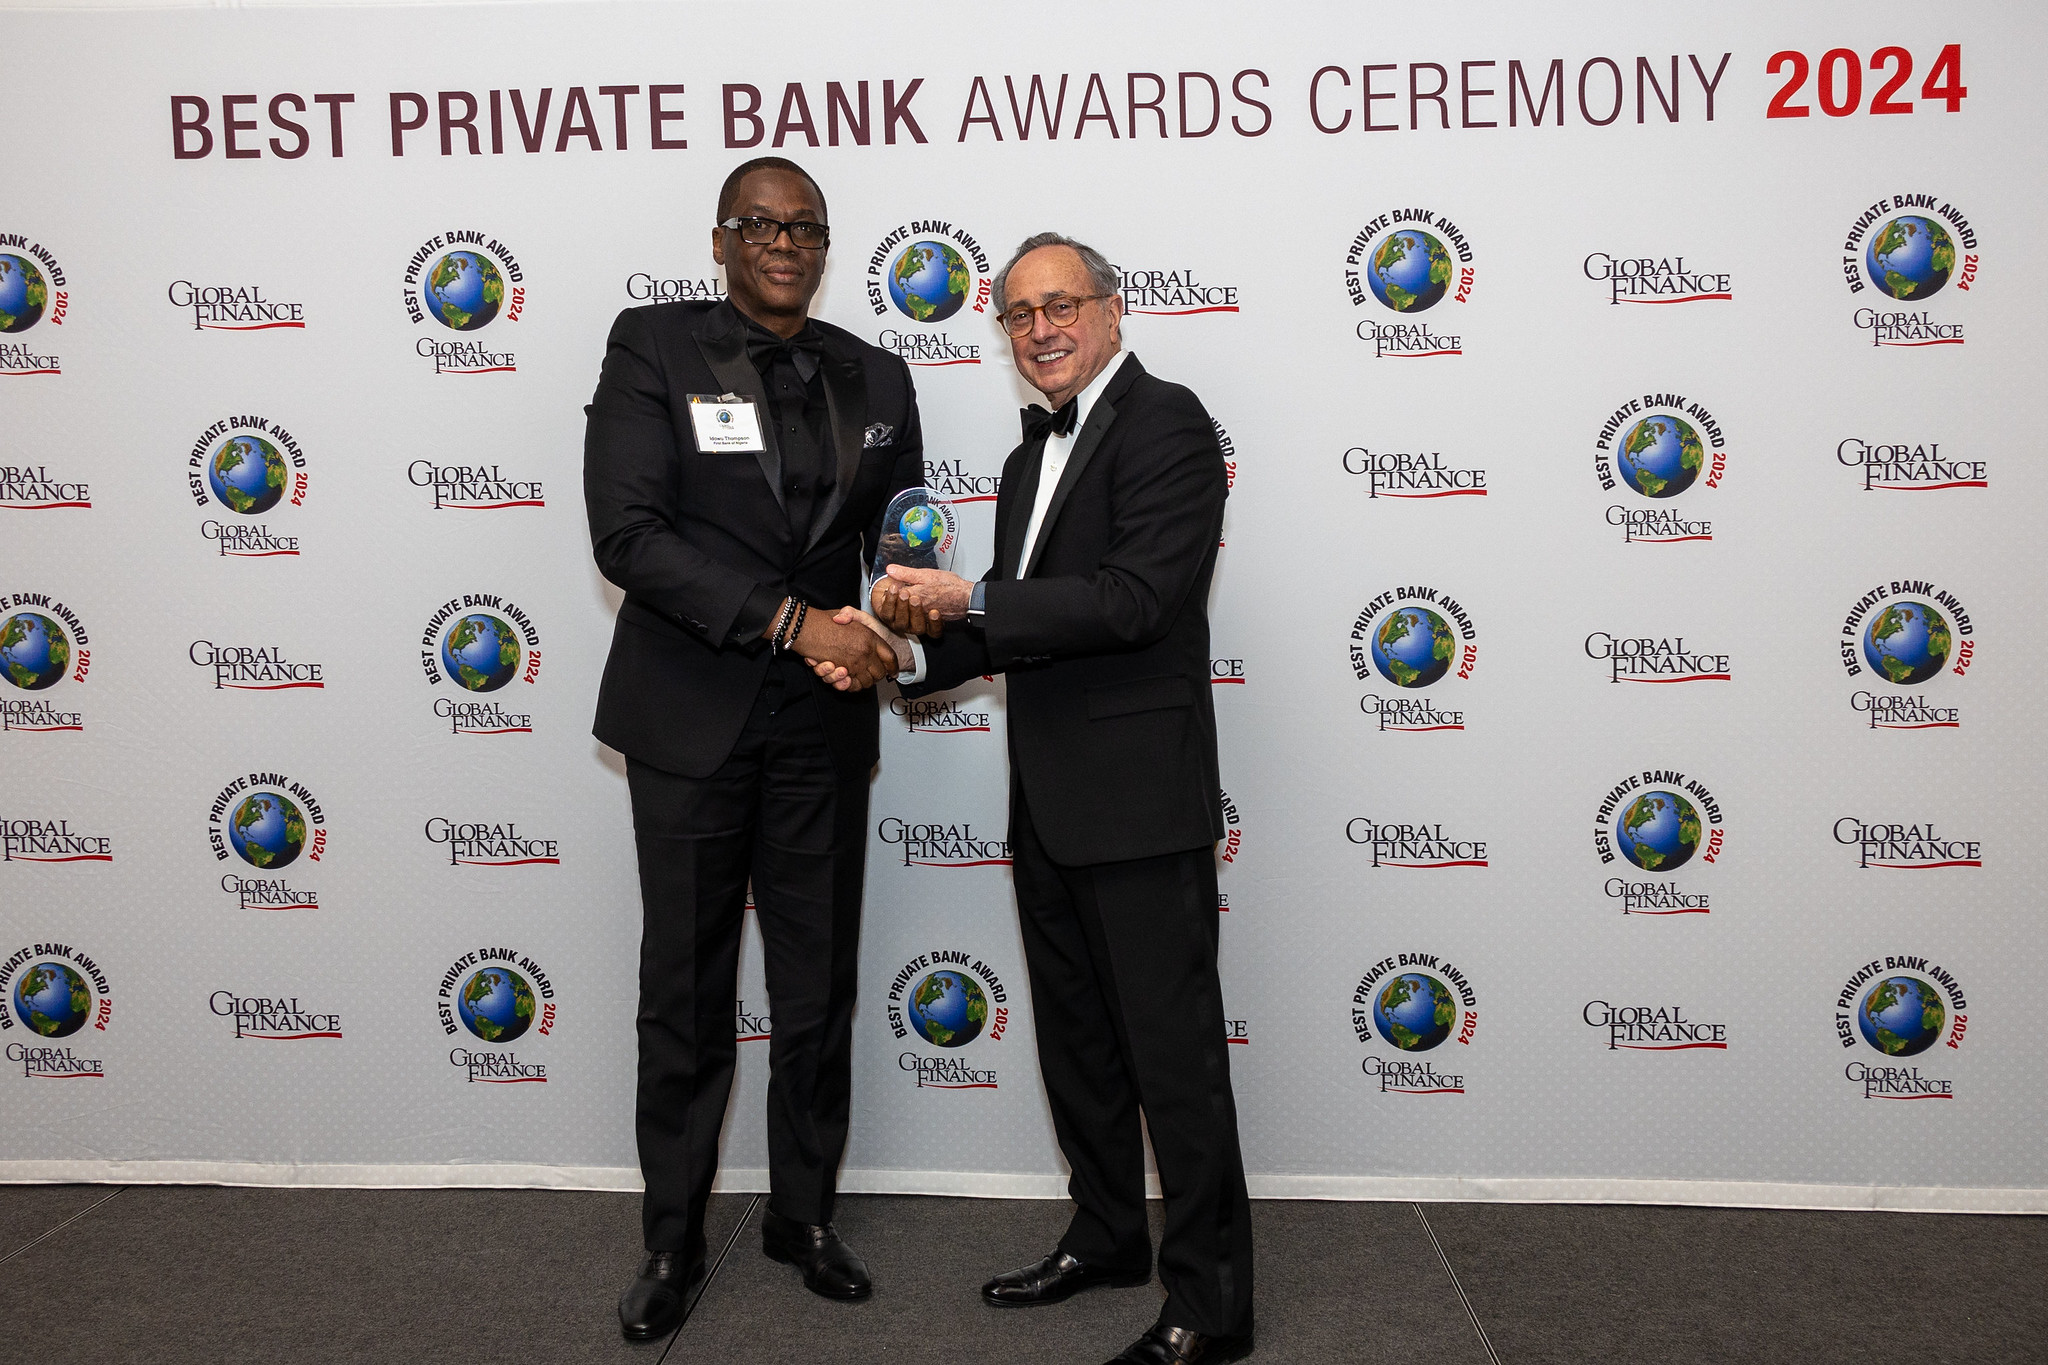 FIRSTBANK EMERGES AS THE BEST PRIVATE BANK IN NIGERIA AND THE BEST PRIVATE BANK FOR SUSTAINABLE INVESTMENT IN AFRICA AT GLOBAL FINANCE AWARDS